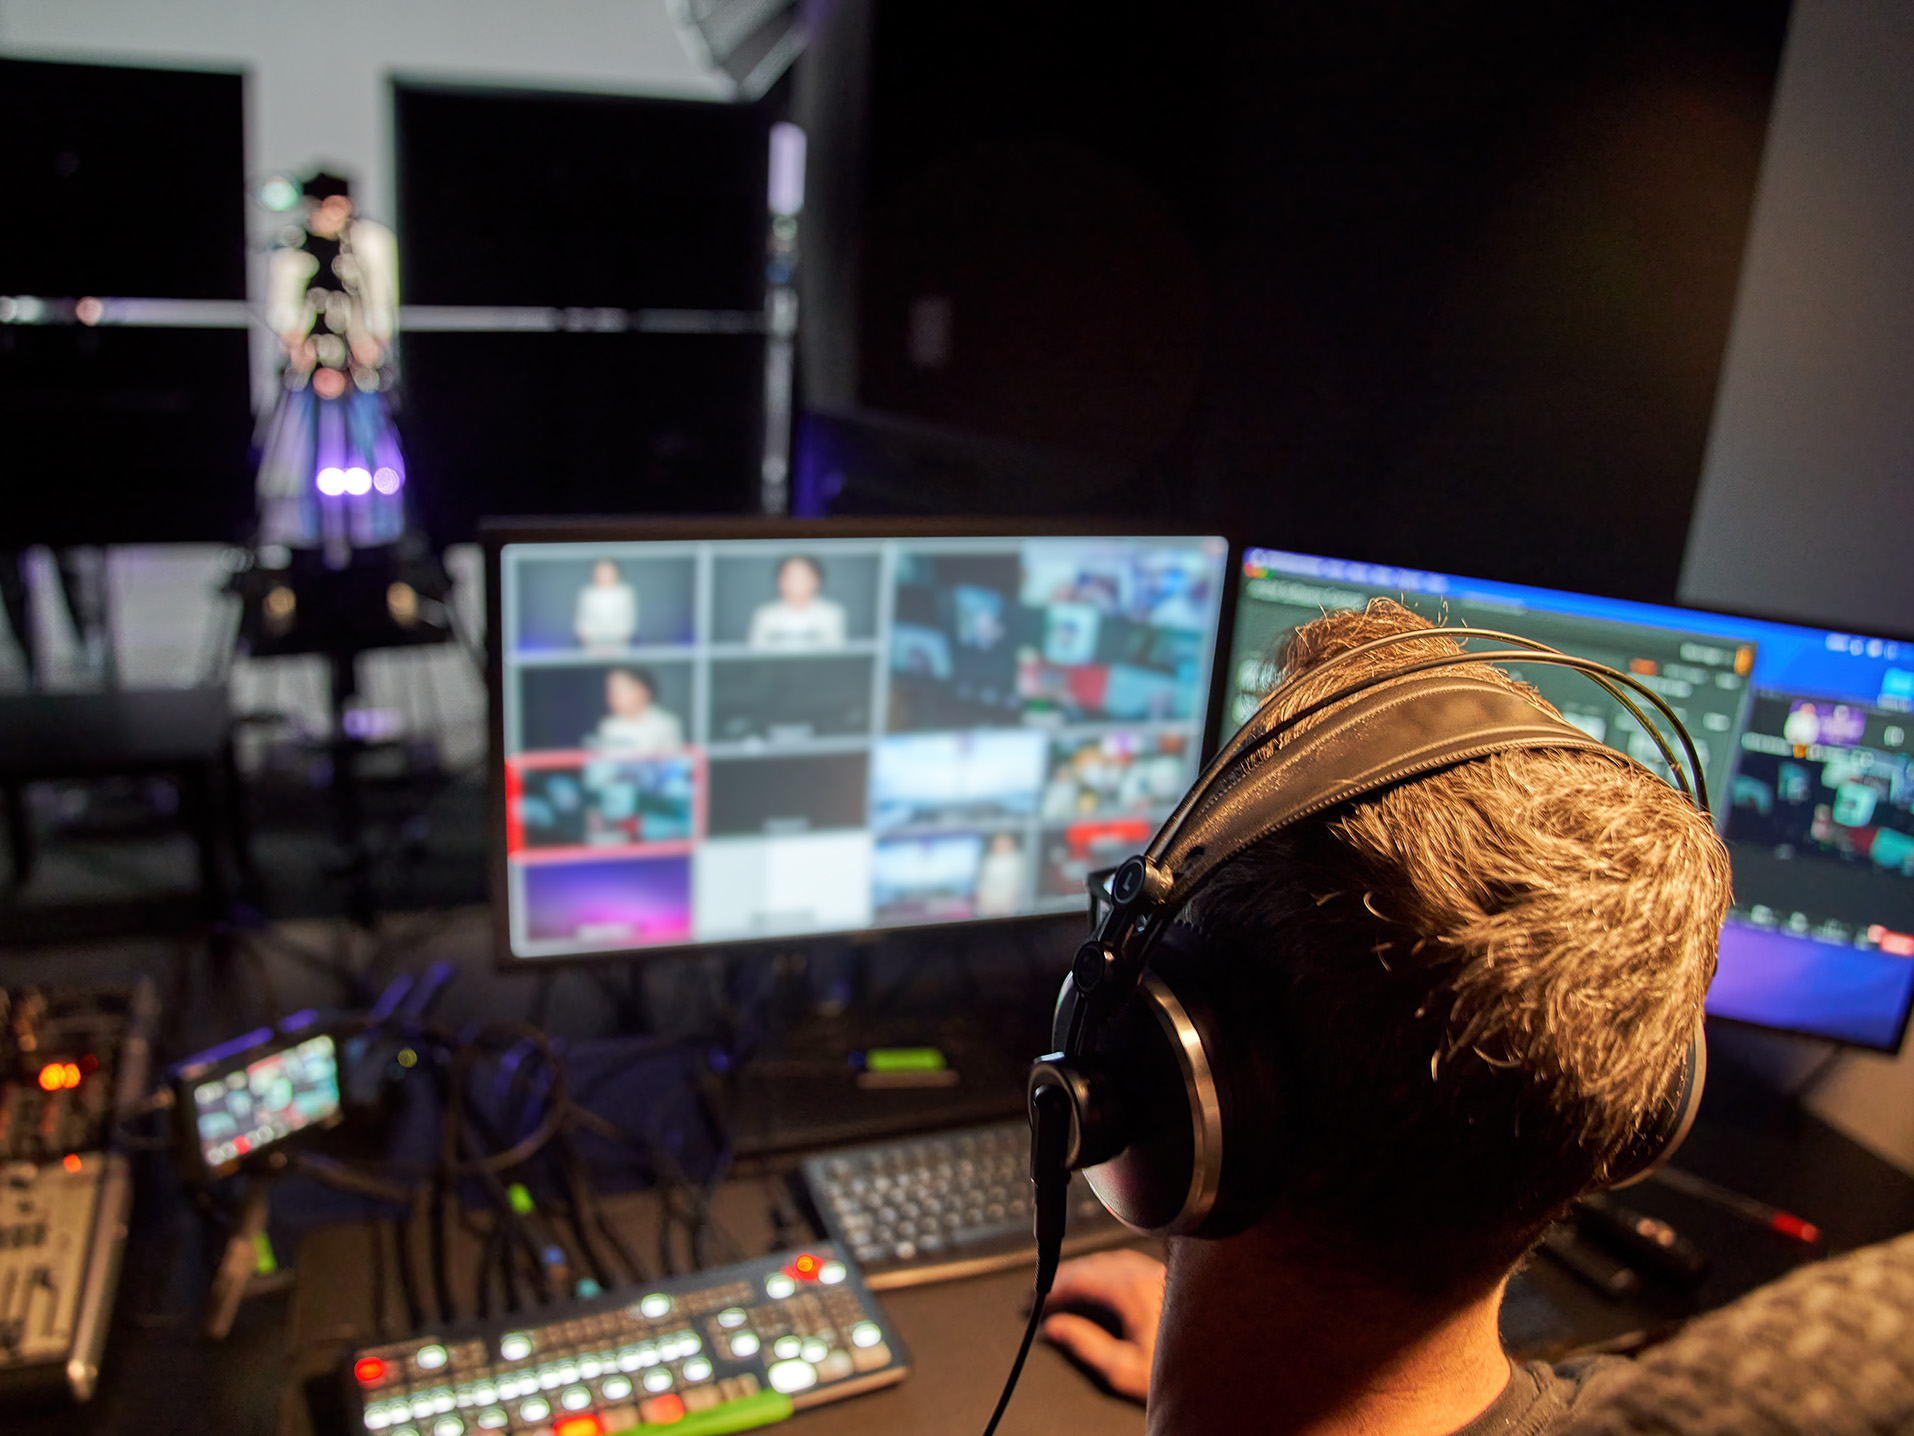 Person wearing headphones and monitoring video with multiple monitors